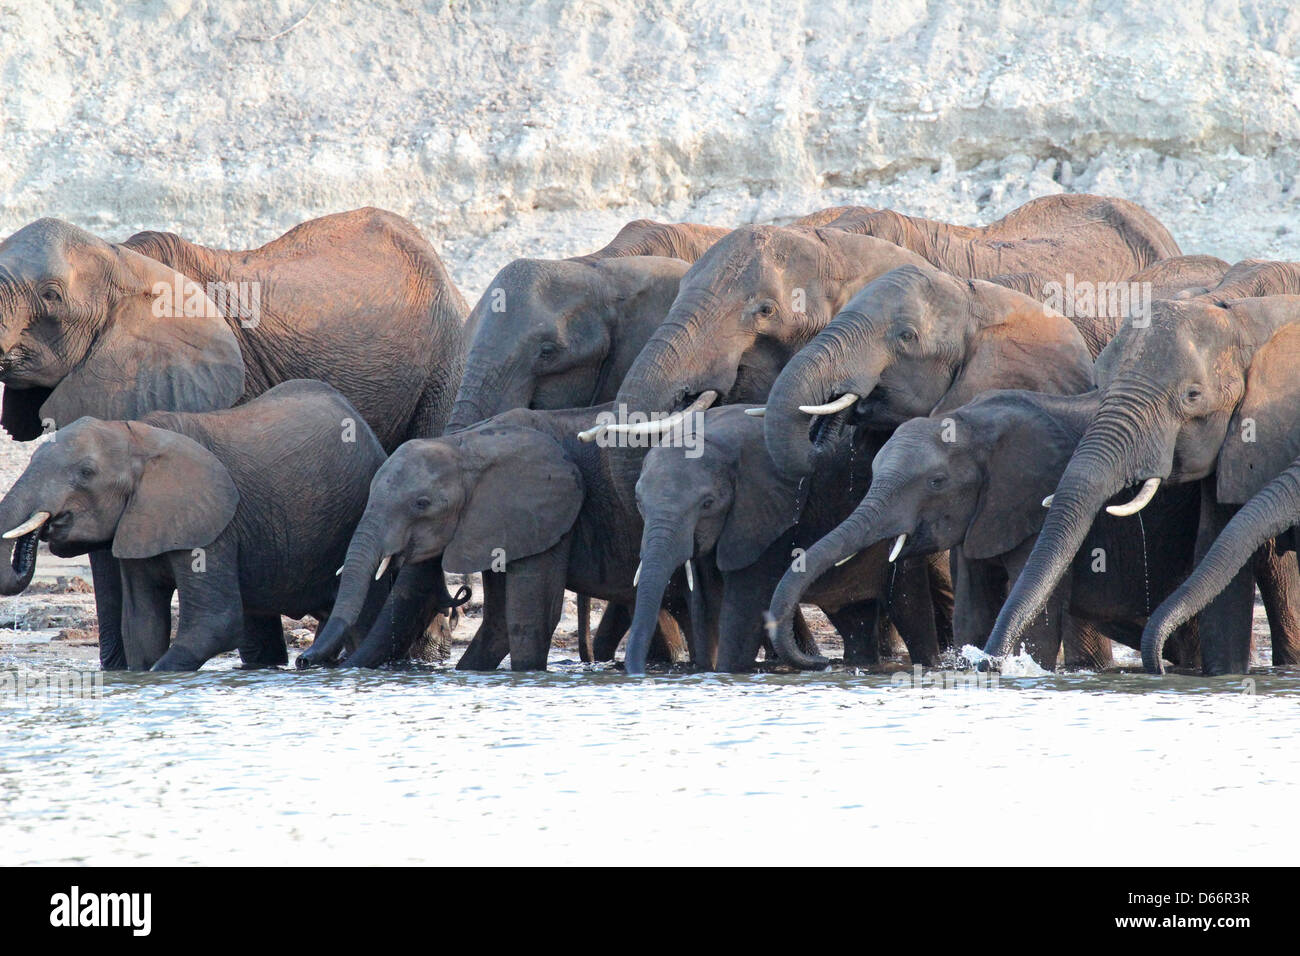 A group of Elephants visits the Chobe River at sunset to have a drink, Chobe NP, Botswana Stock Photo